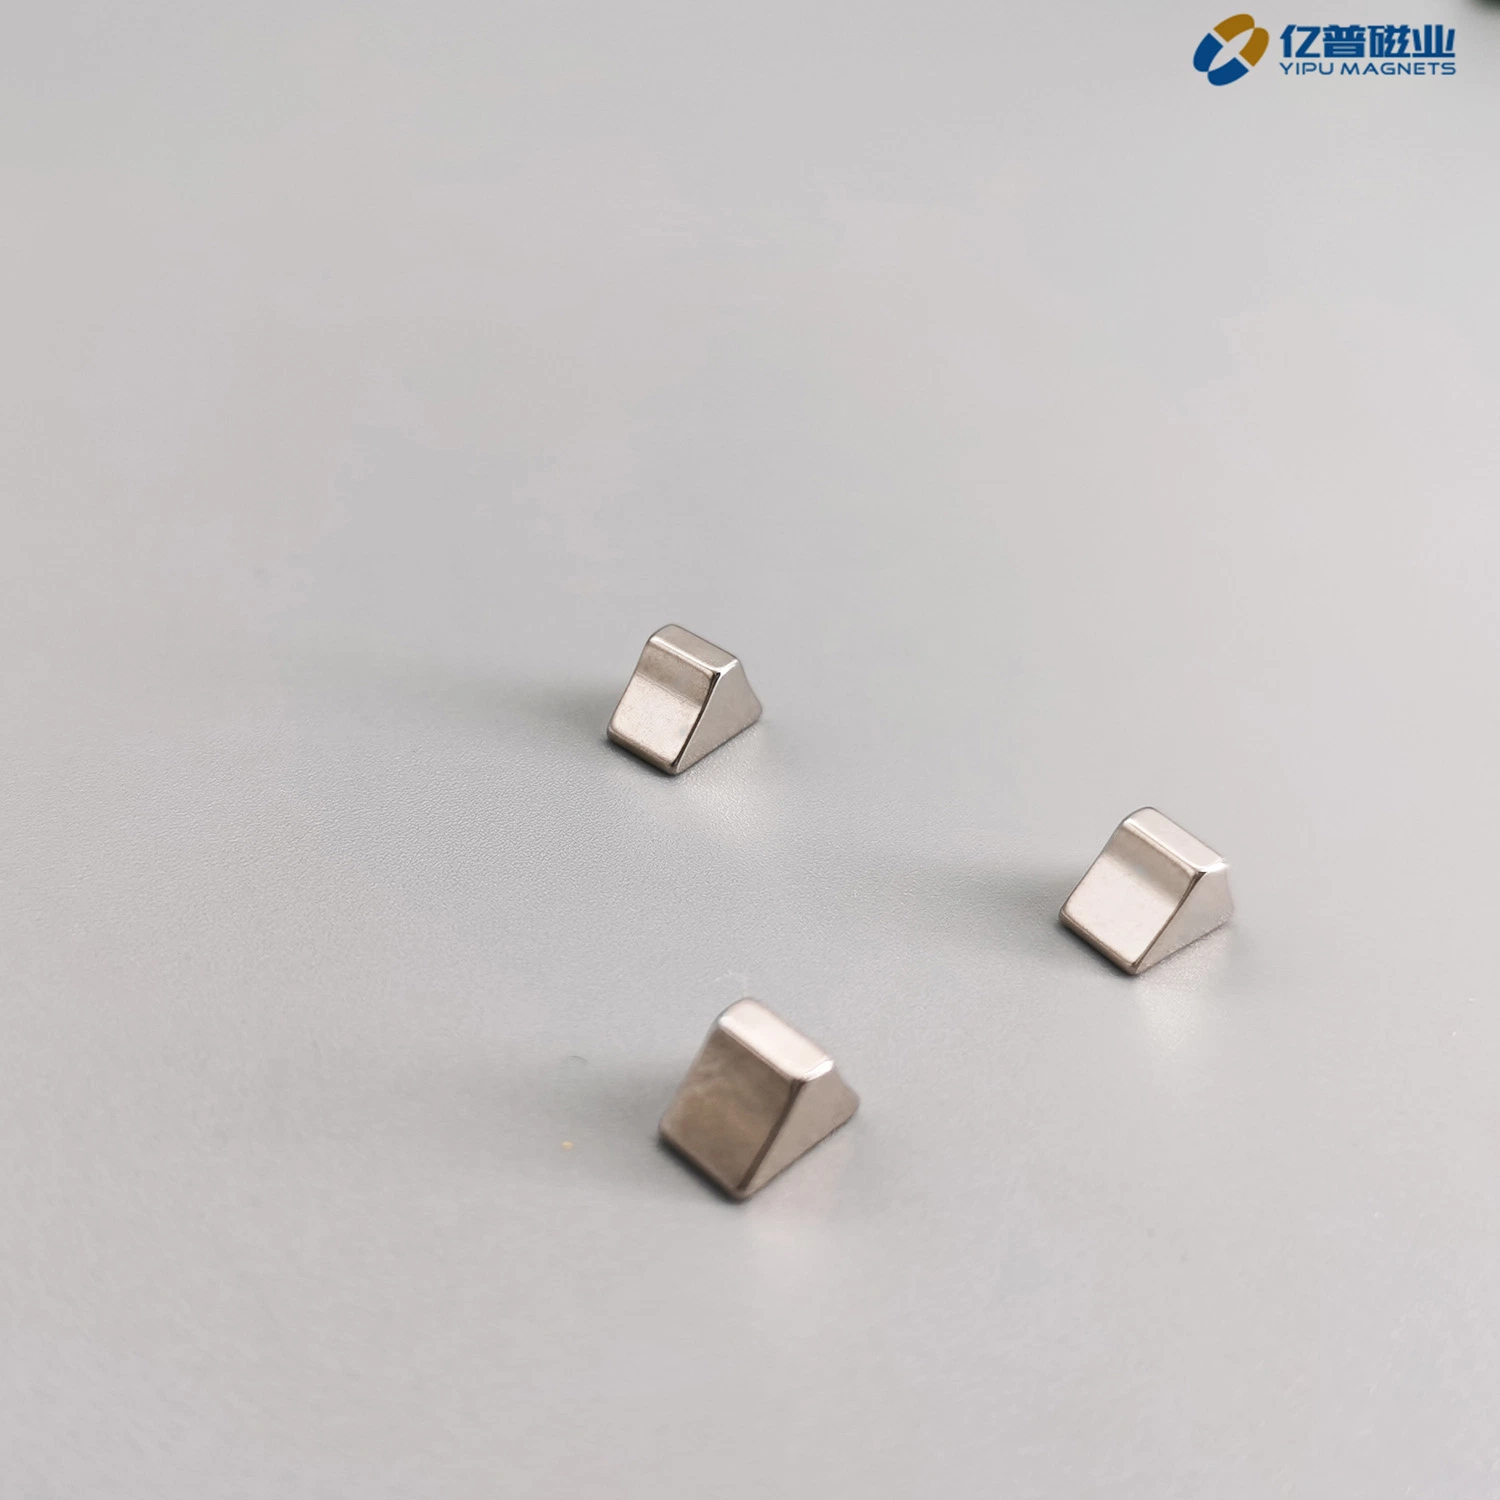 Special Shape Magnet/Neodymium Magnet/NdFeB Magnet for Electronic Consumer